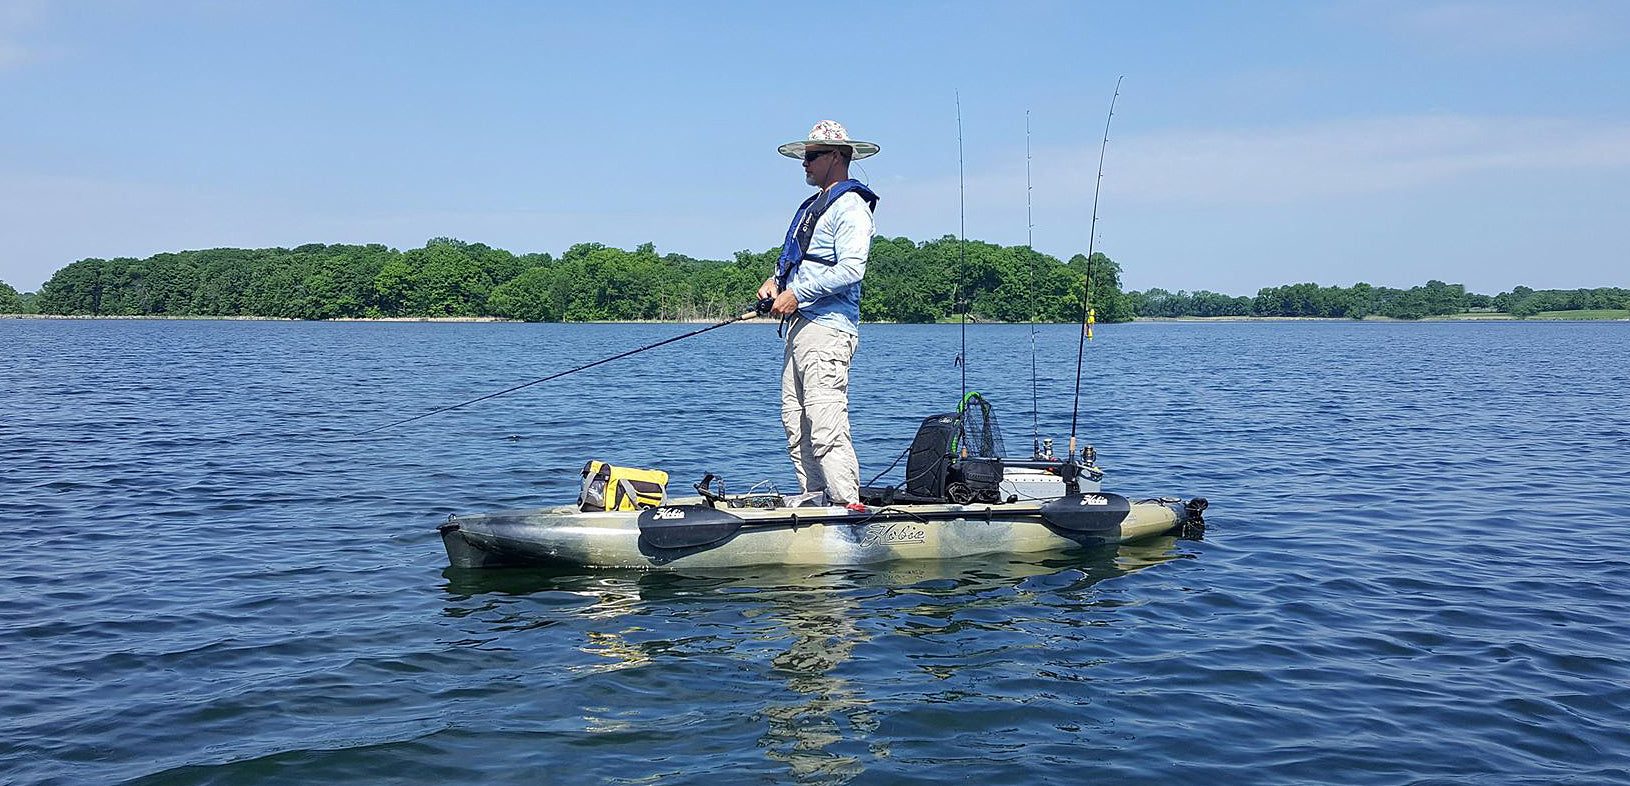 https://cdn.shopify.com/s/files/1/1123/9358/files/Stand_And-Fish-From-Hobie-Outback-Kayak.jpg?v=1527964368